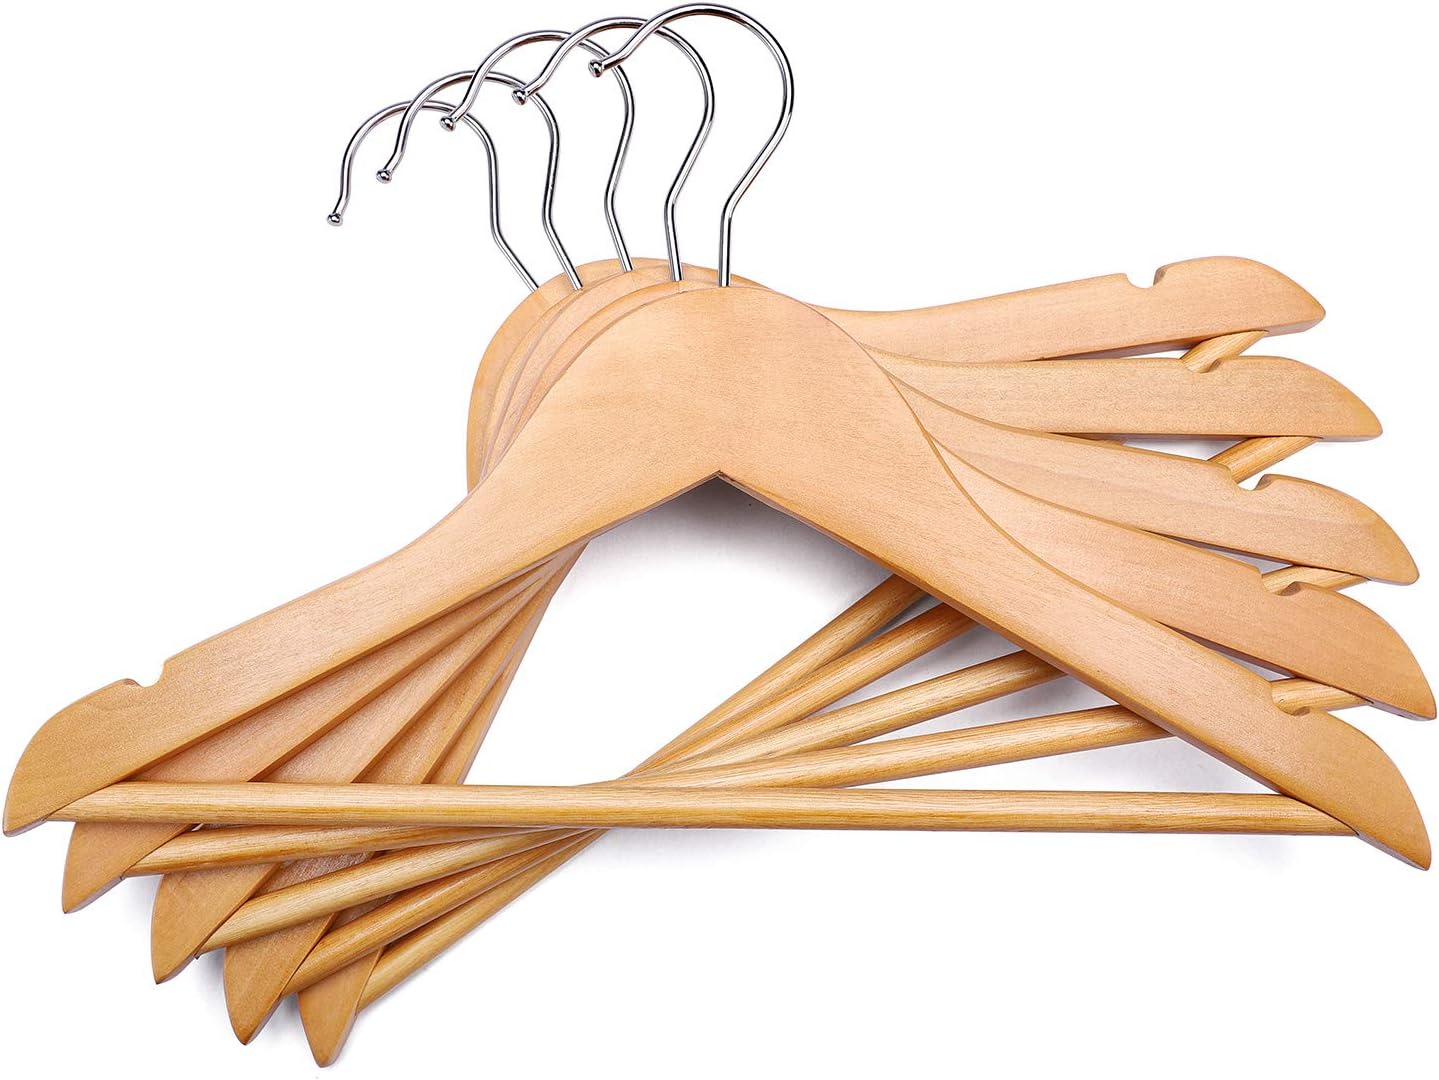 HOUSE DAY 12.6X7.9 Inch Wooden Childrens Hangers Kids Hangers Natural 20 Pack